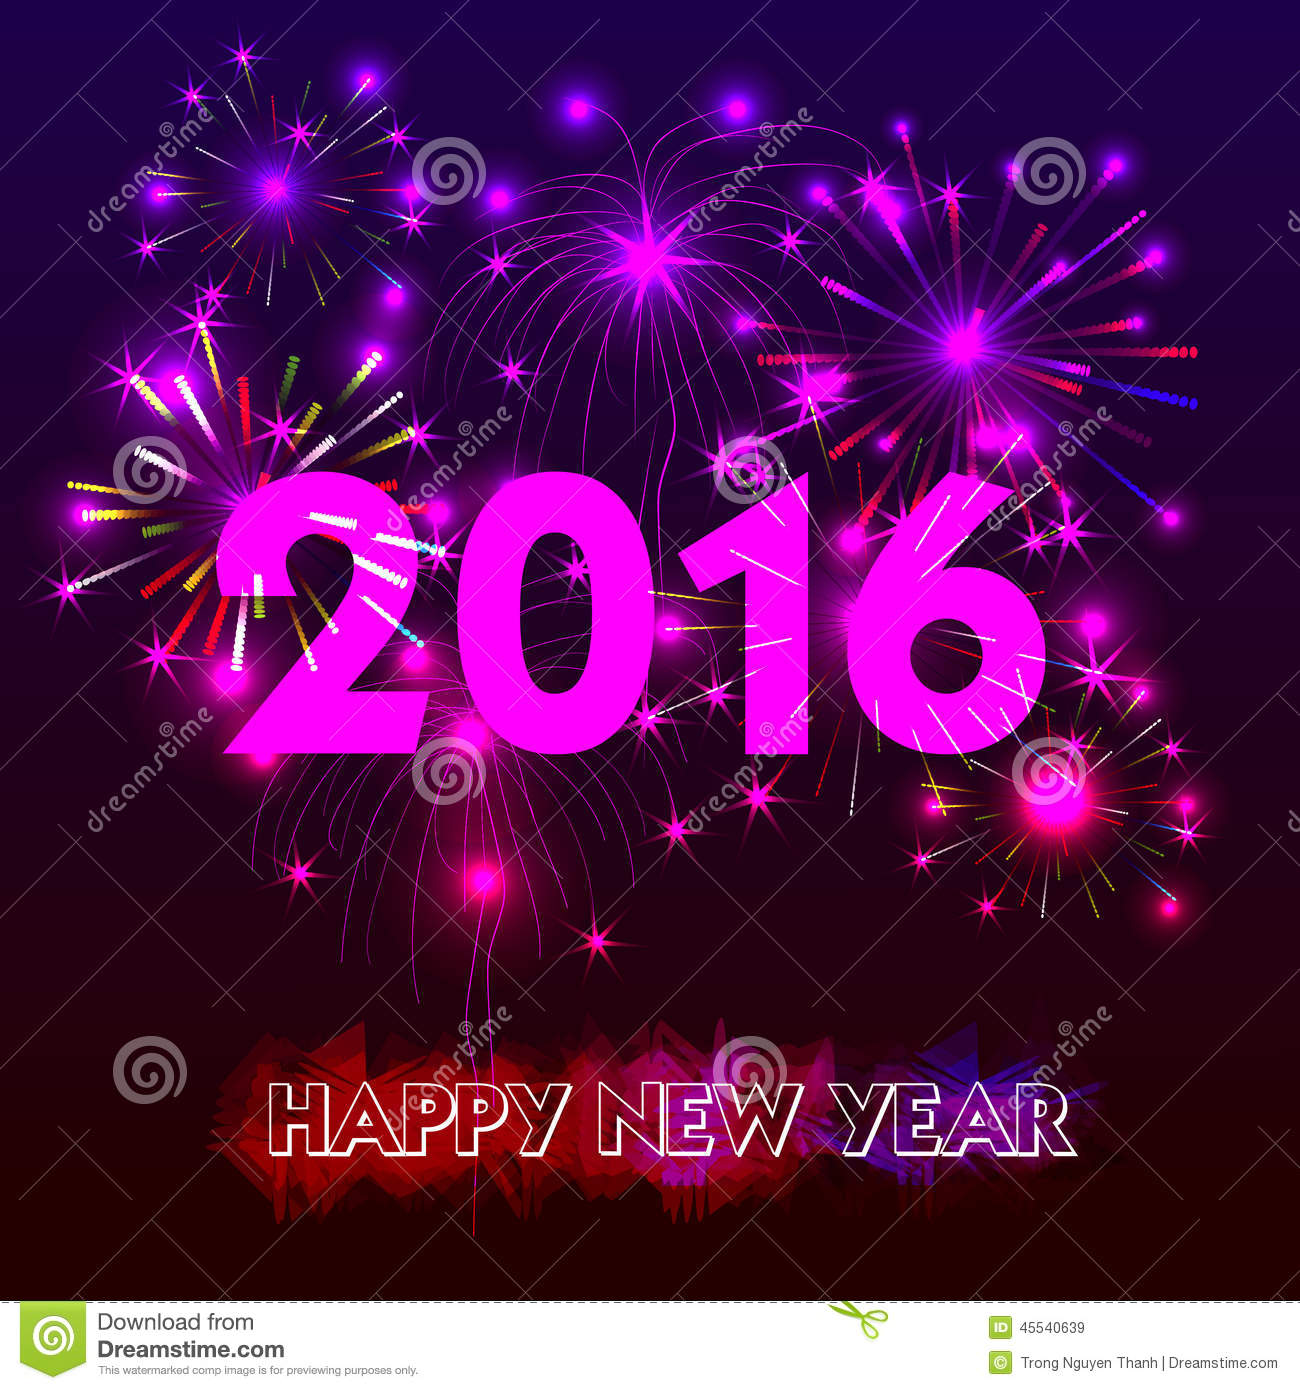 Happy New Year Image Wallpaper Puter